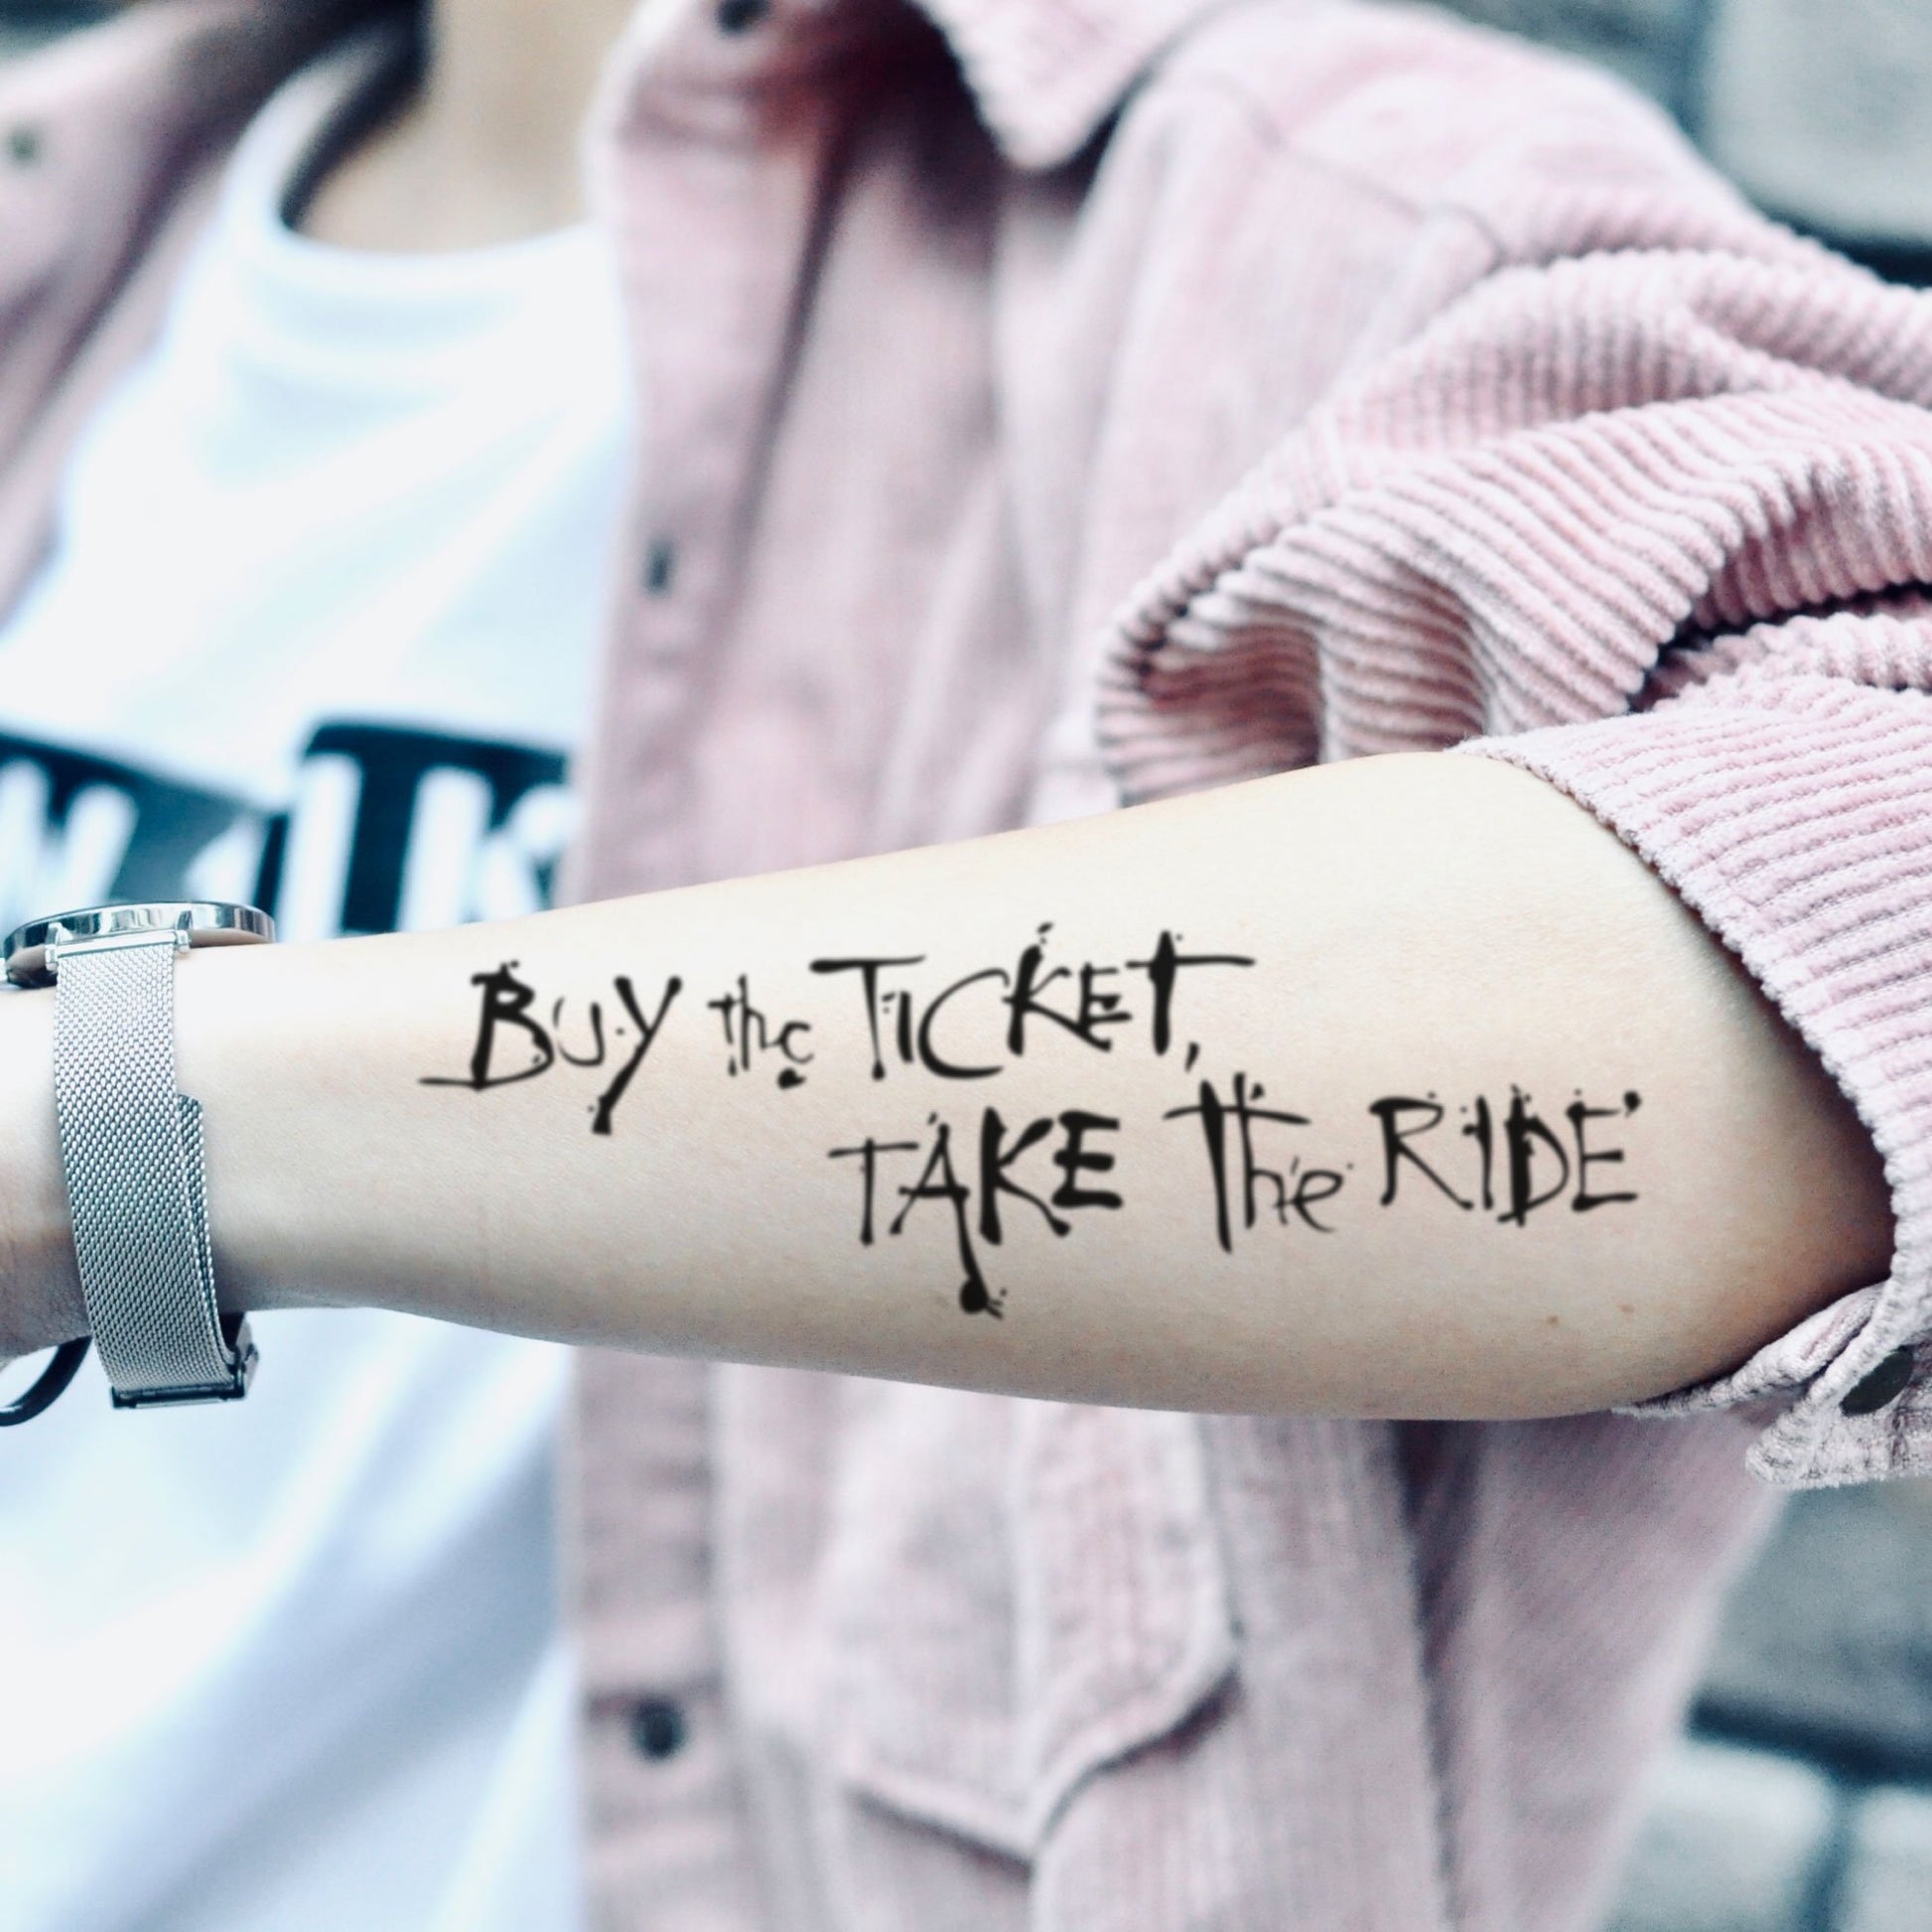 fake big buy the ticket take the ride lettering temporary tattoo sticker design idea on forearm